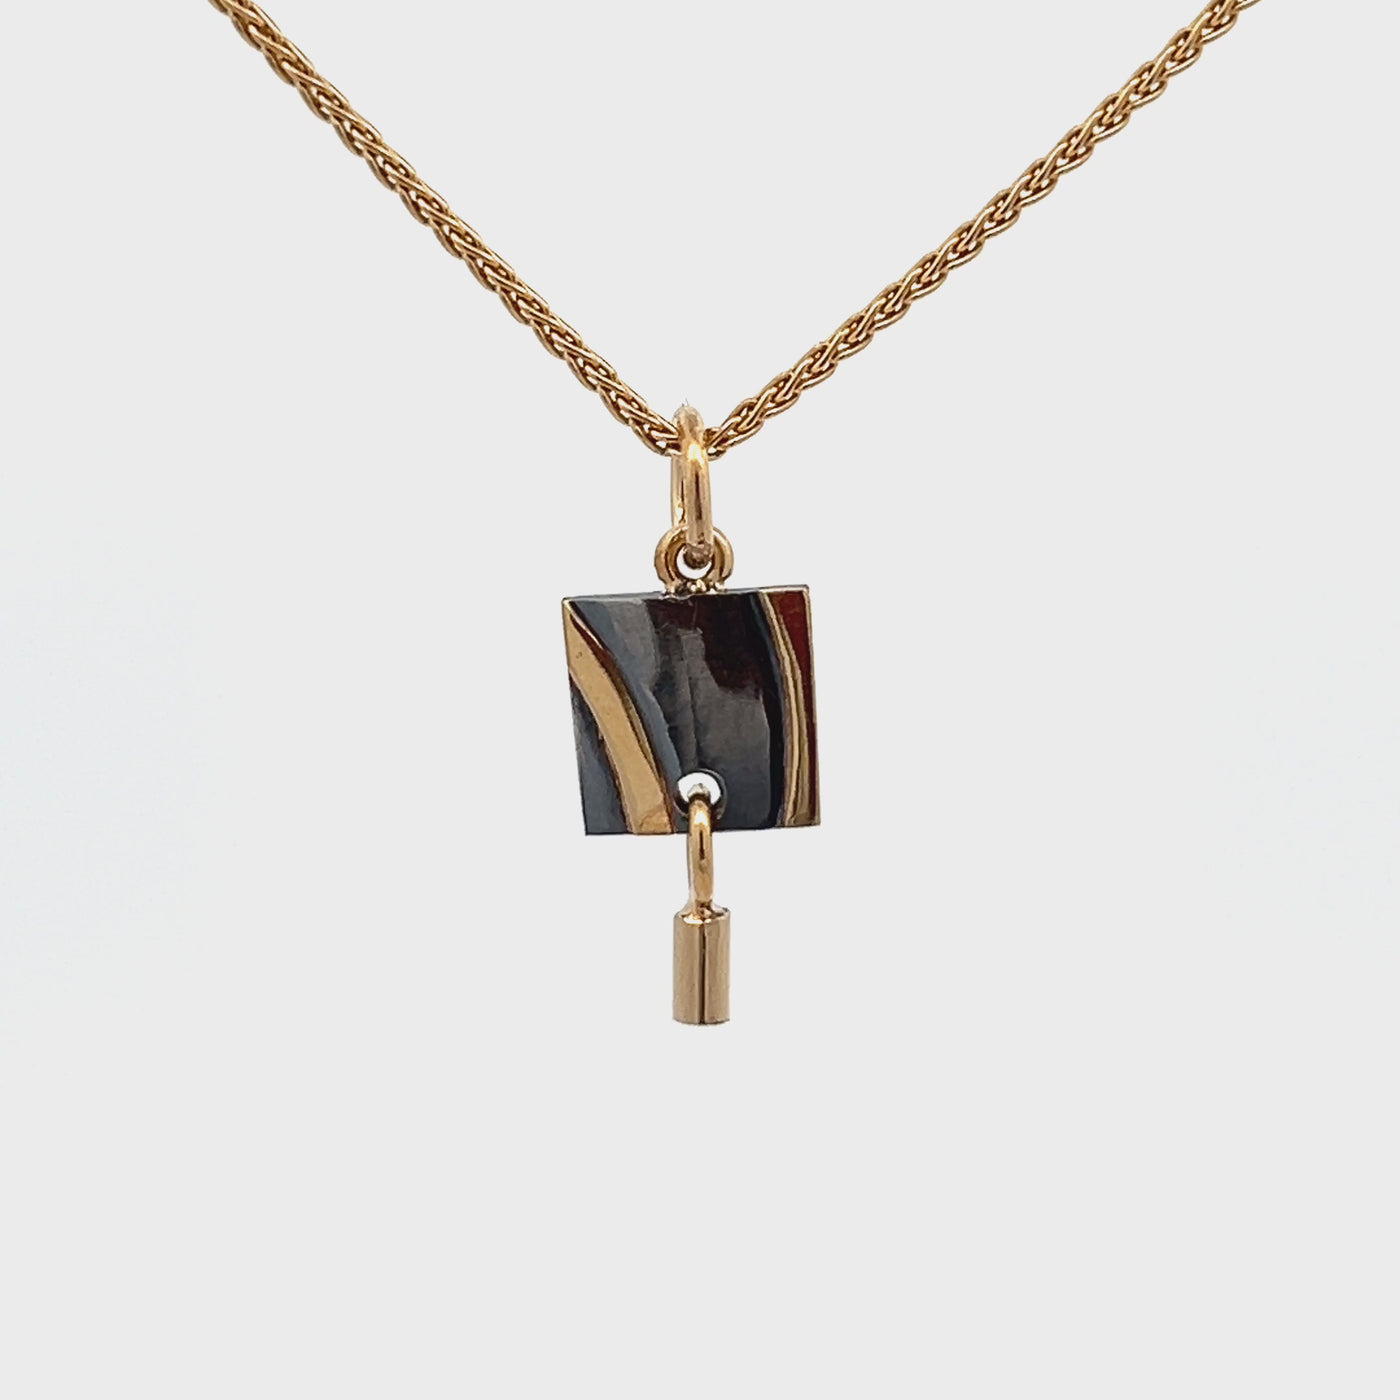 Oxidized Sterling Silver and 18k Yellow Gold Pathways Pendant by Paul Richter